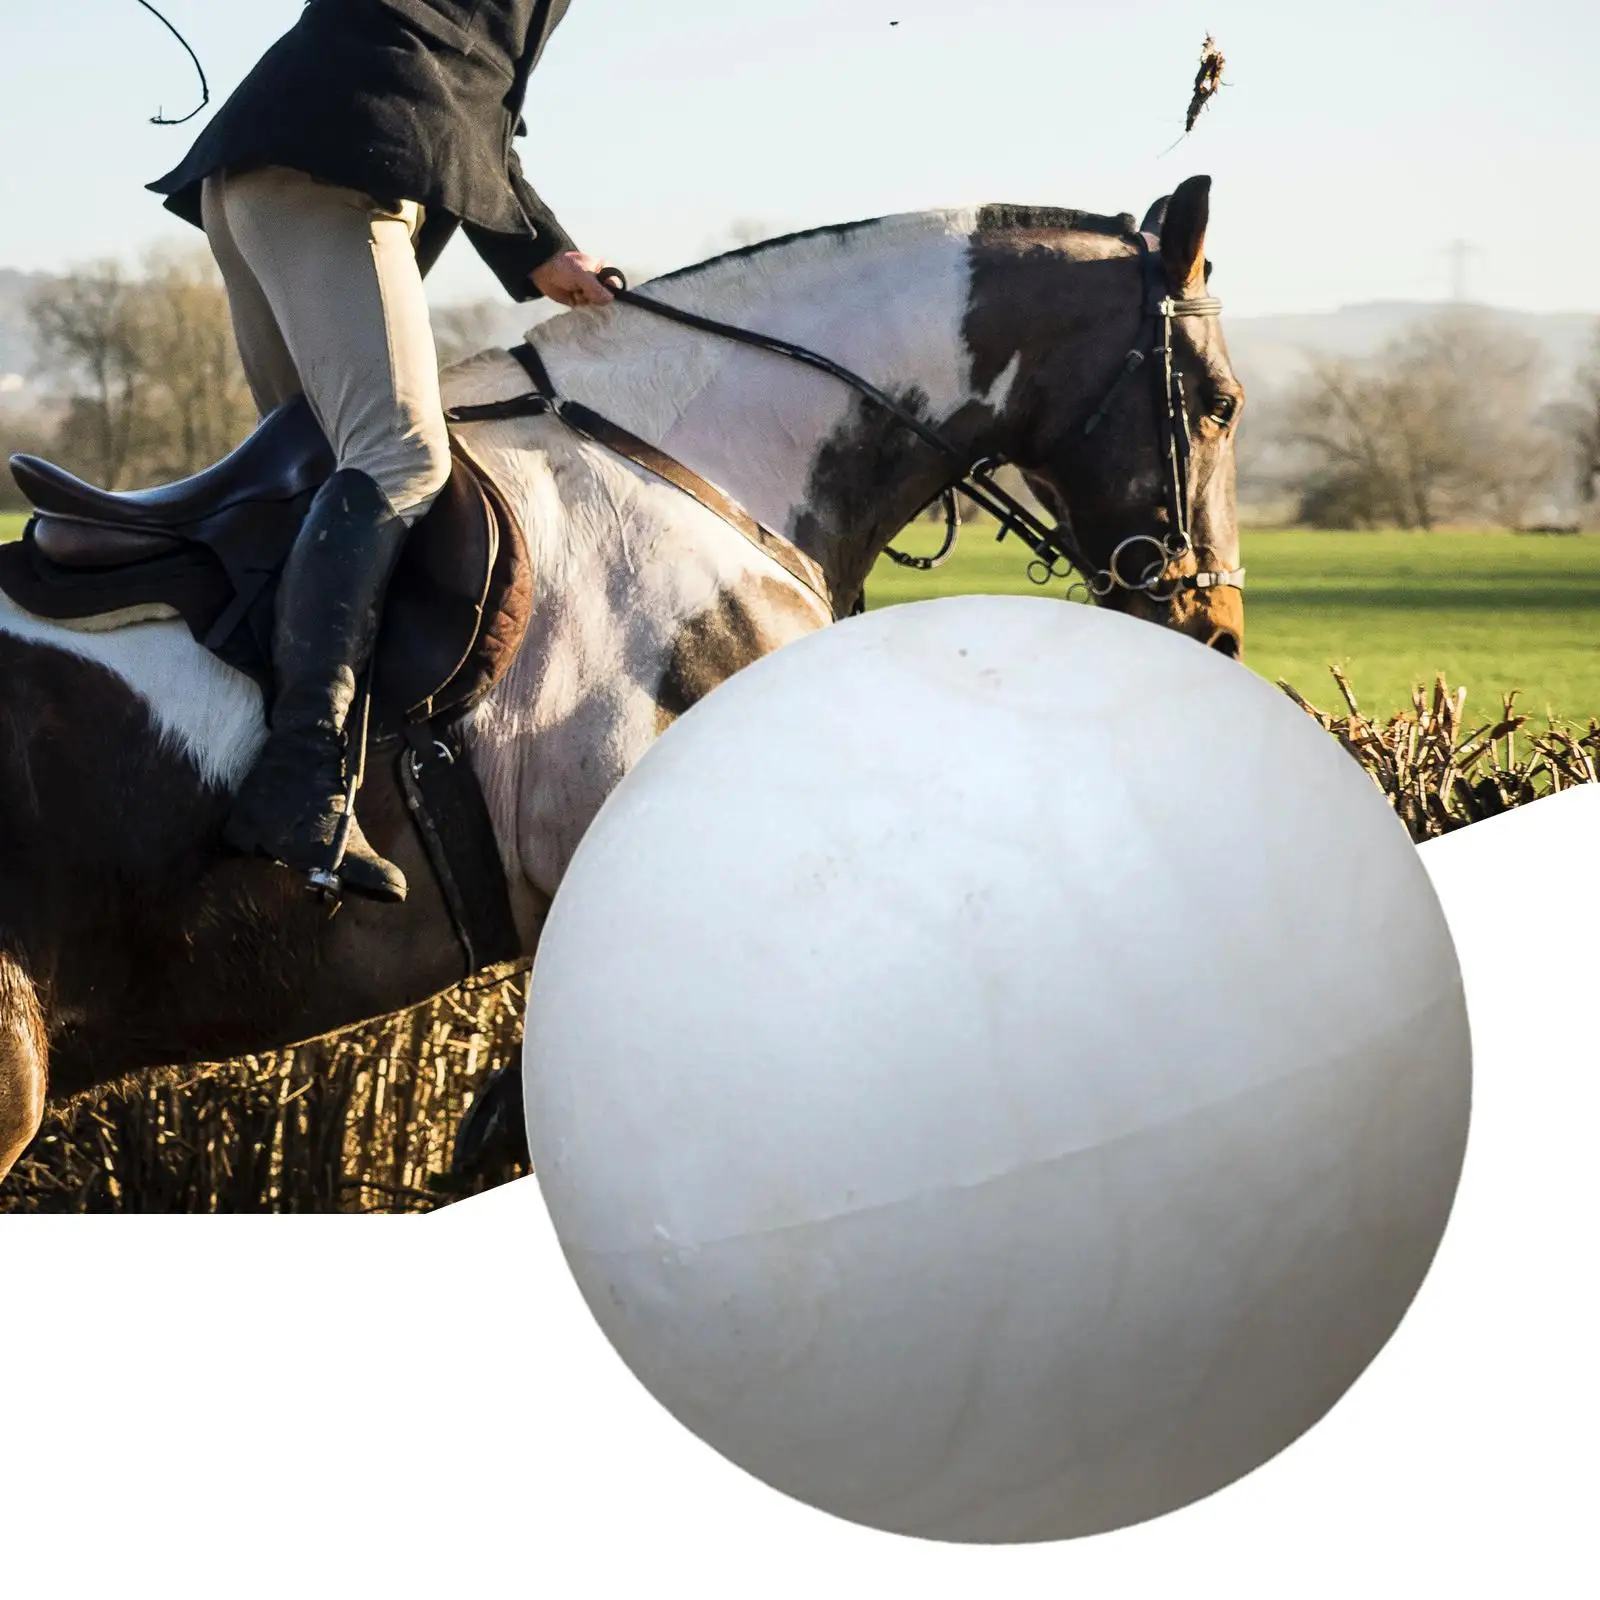 Toss Jolly Play Ball Wear Resistant Lightweight PC for Horse Play Tugging Goats